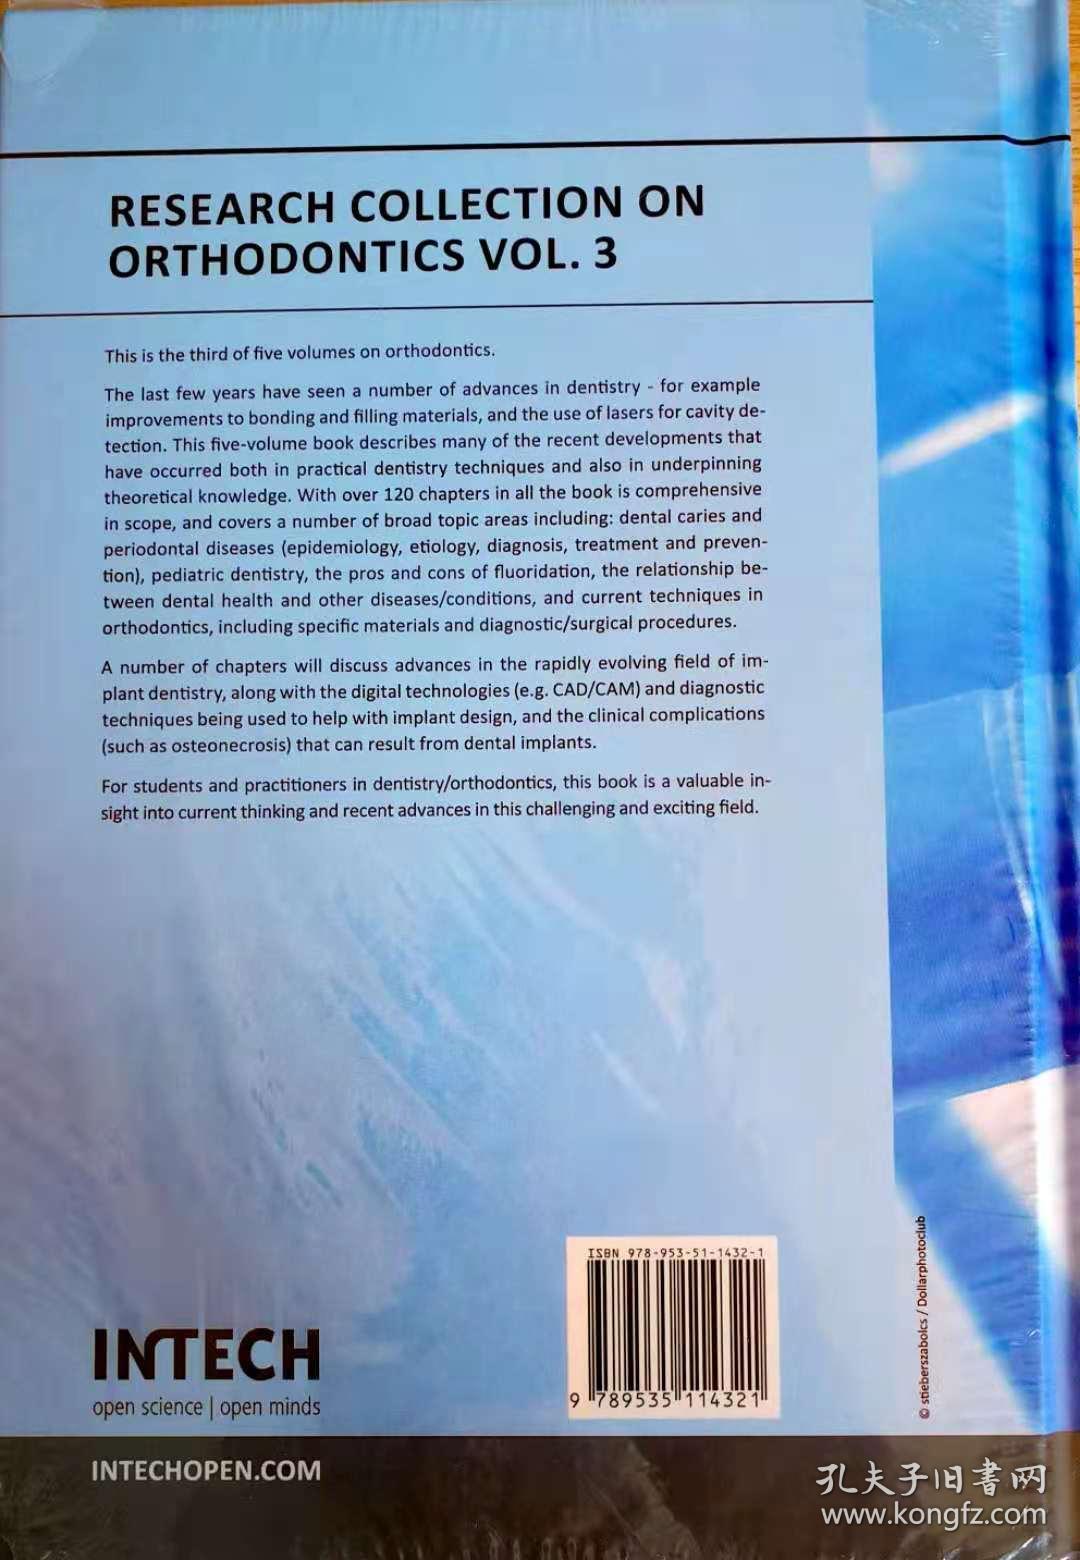 Research Collection on Orthodontics Vol.3